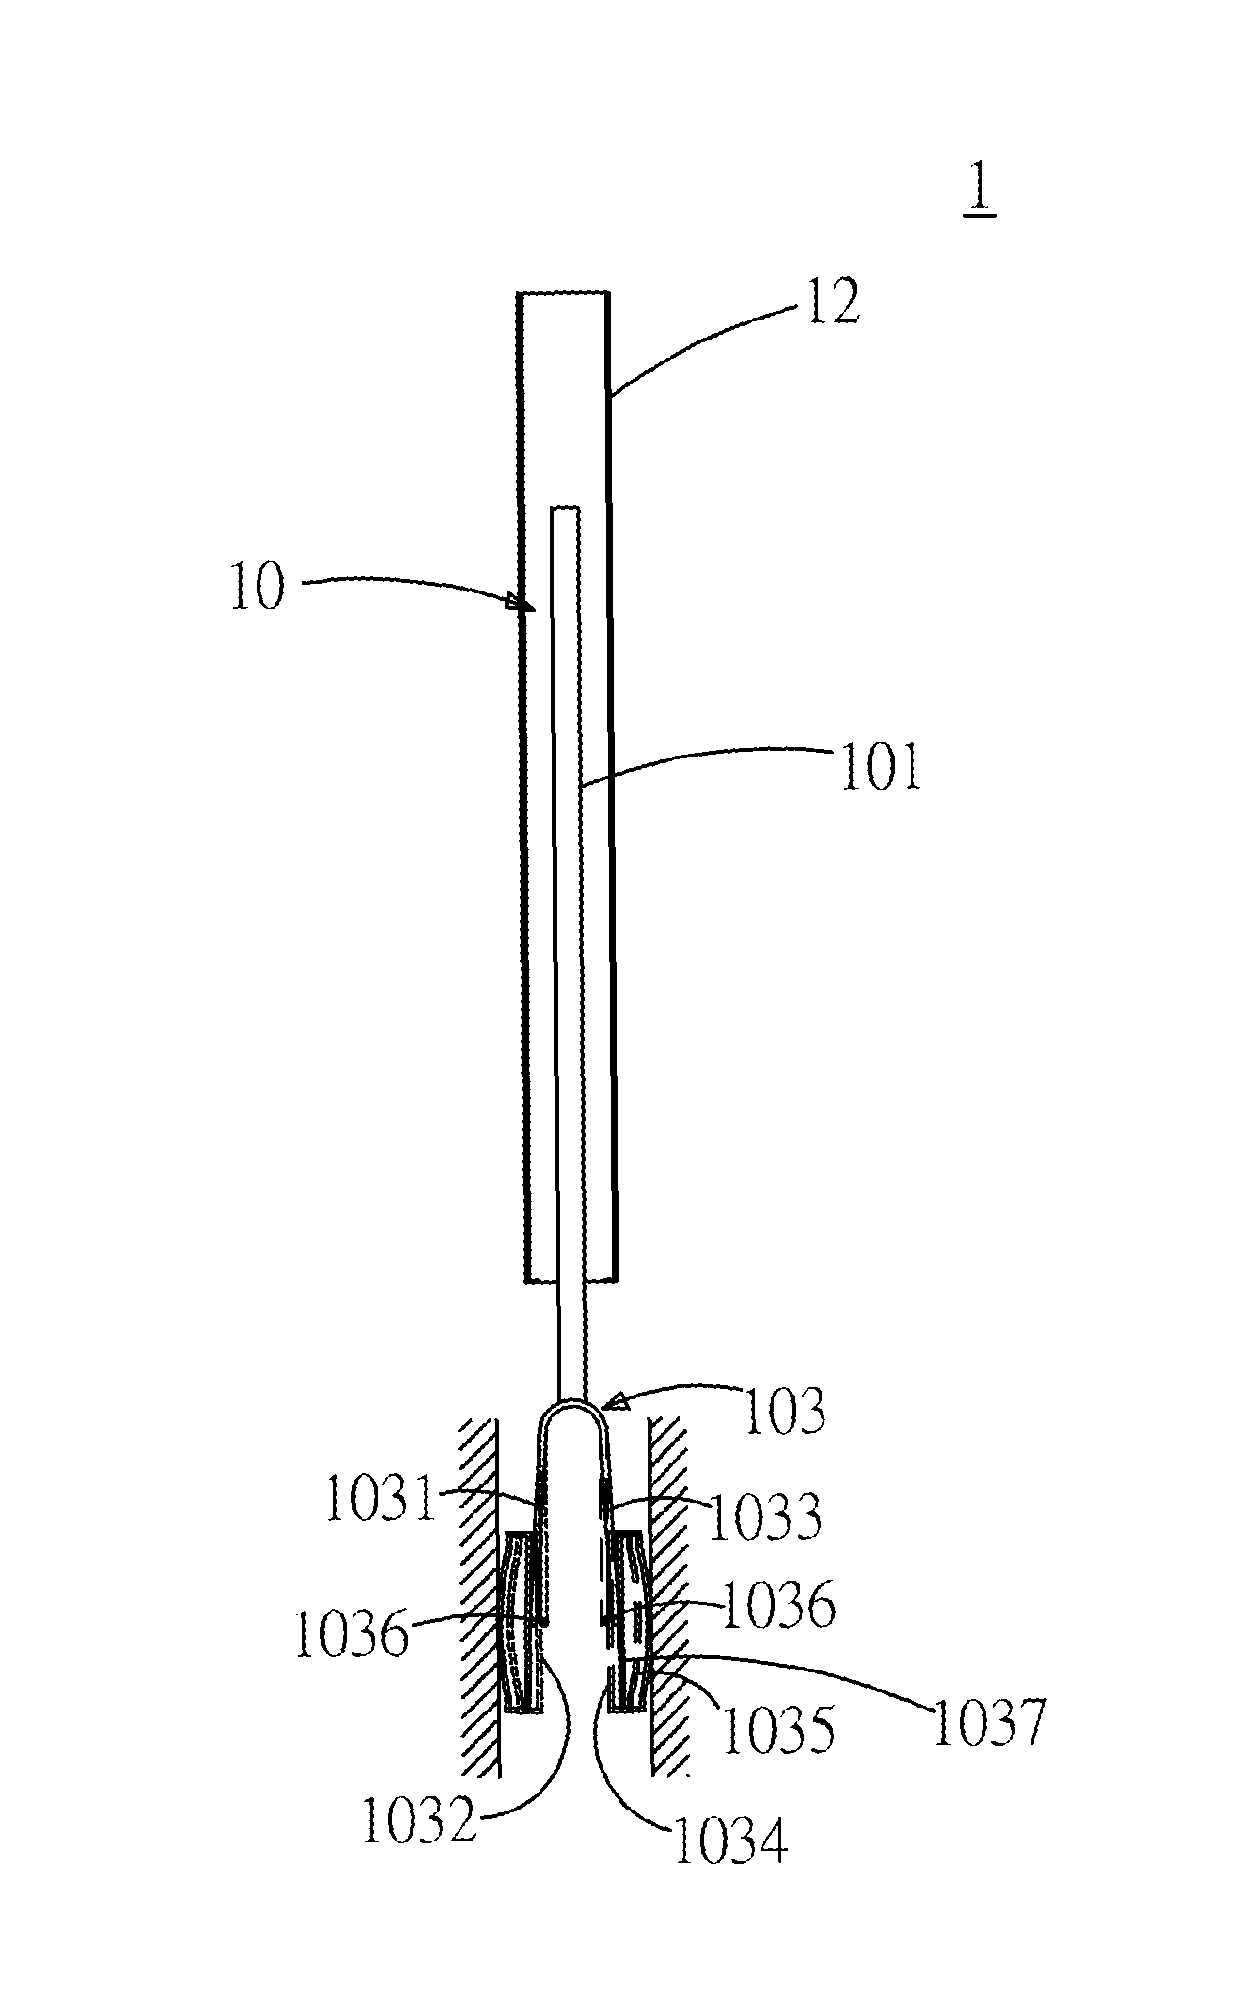 Wipe sampling device of radioactive contaminants on surface of spent nuclear fuel storage canister